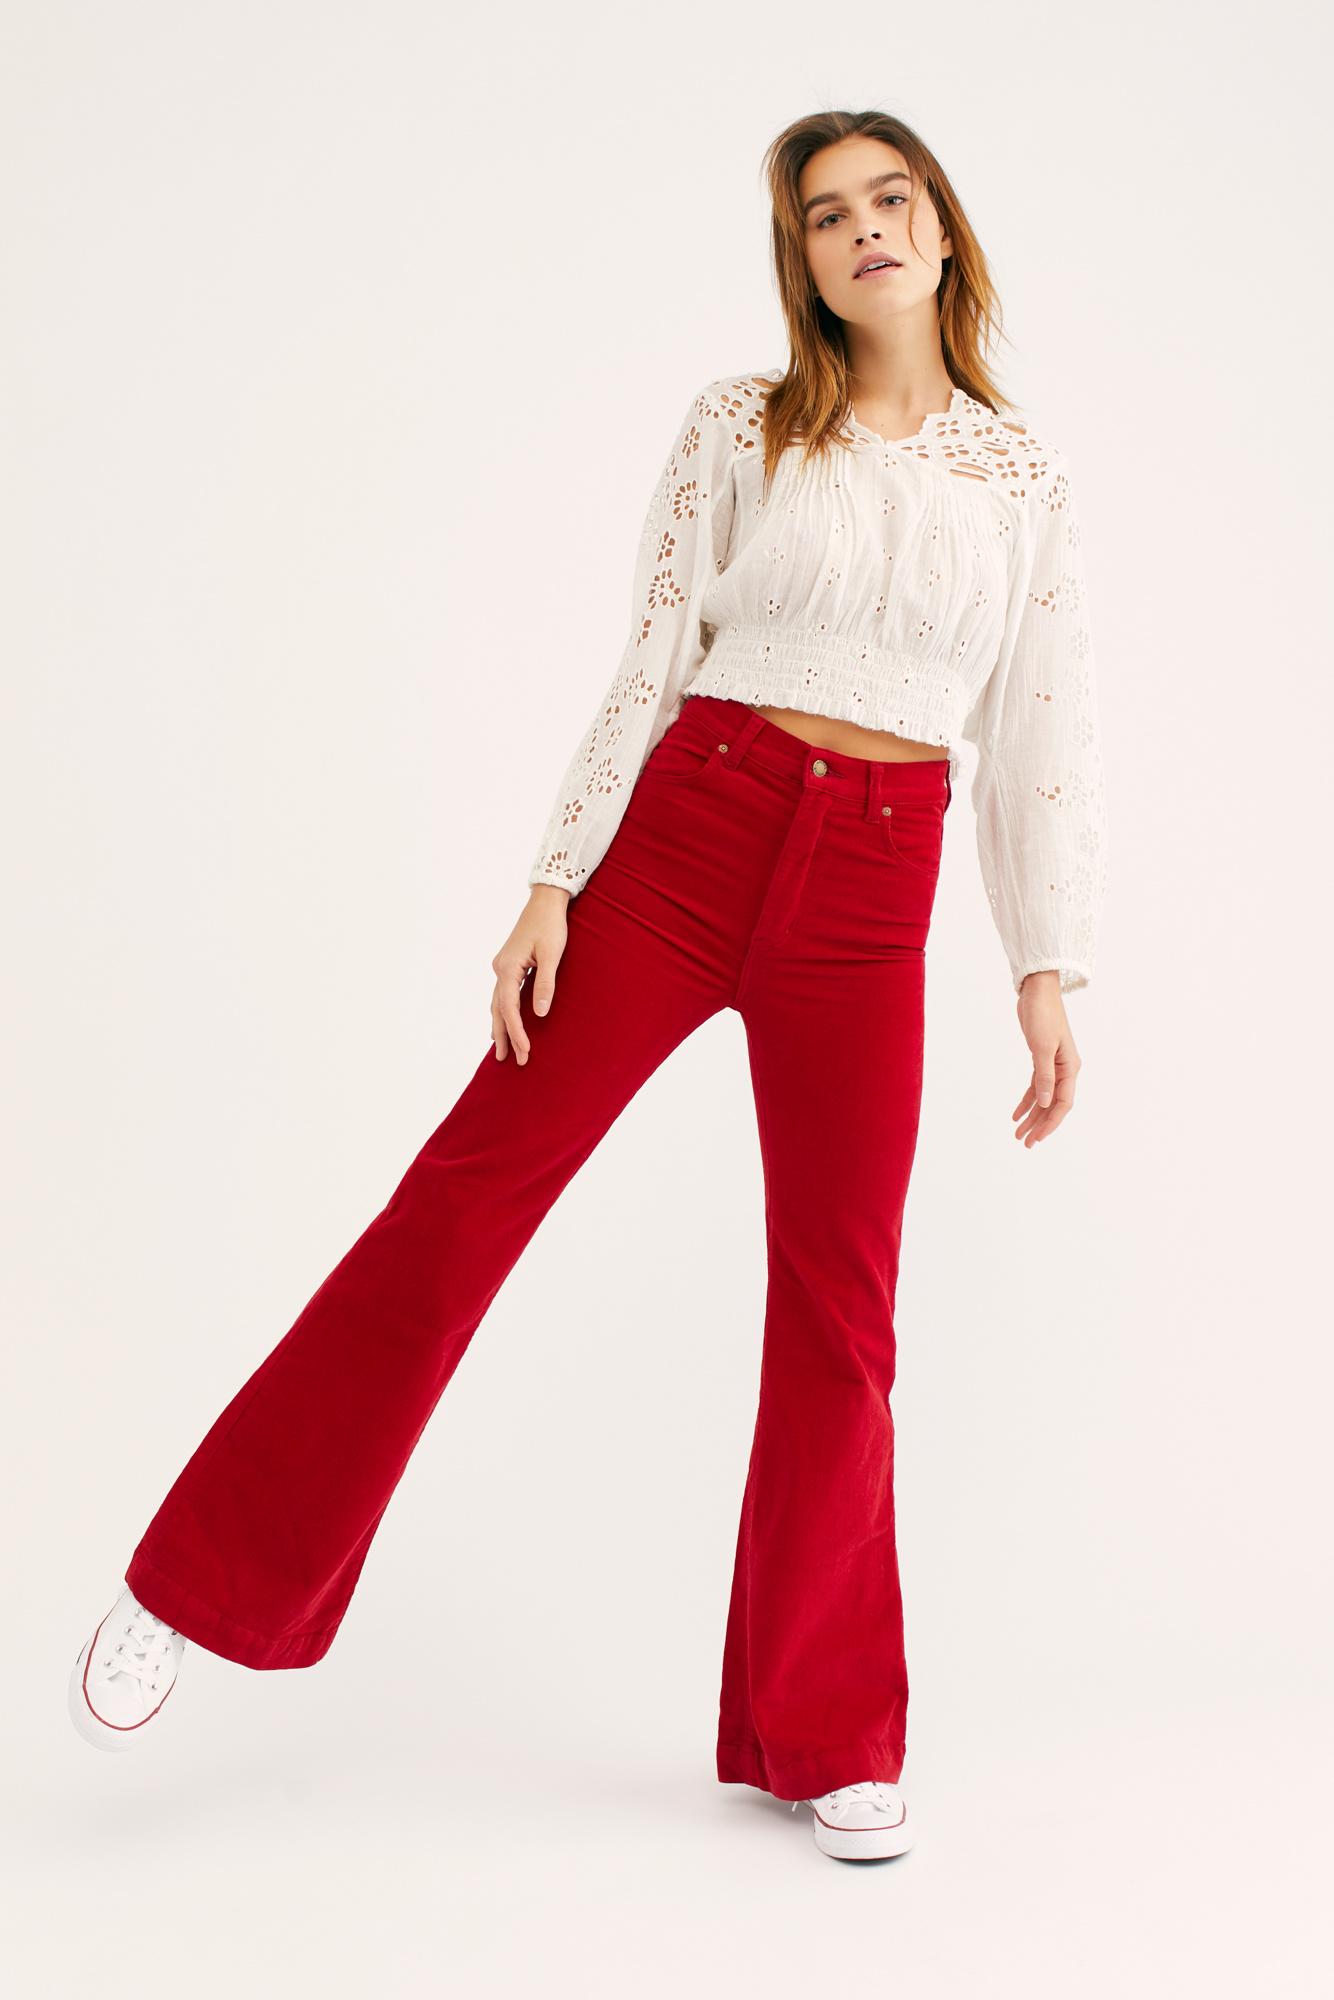 Free People Rolla's East Coast Cord Flare Trousers in Red